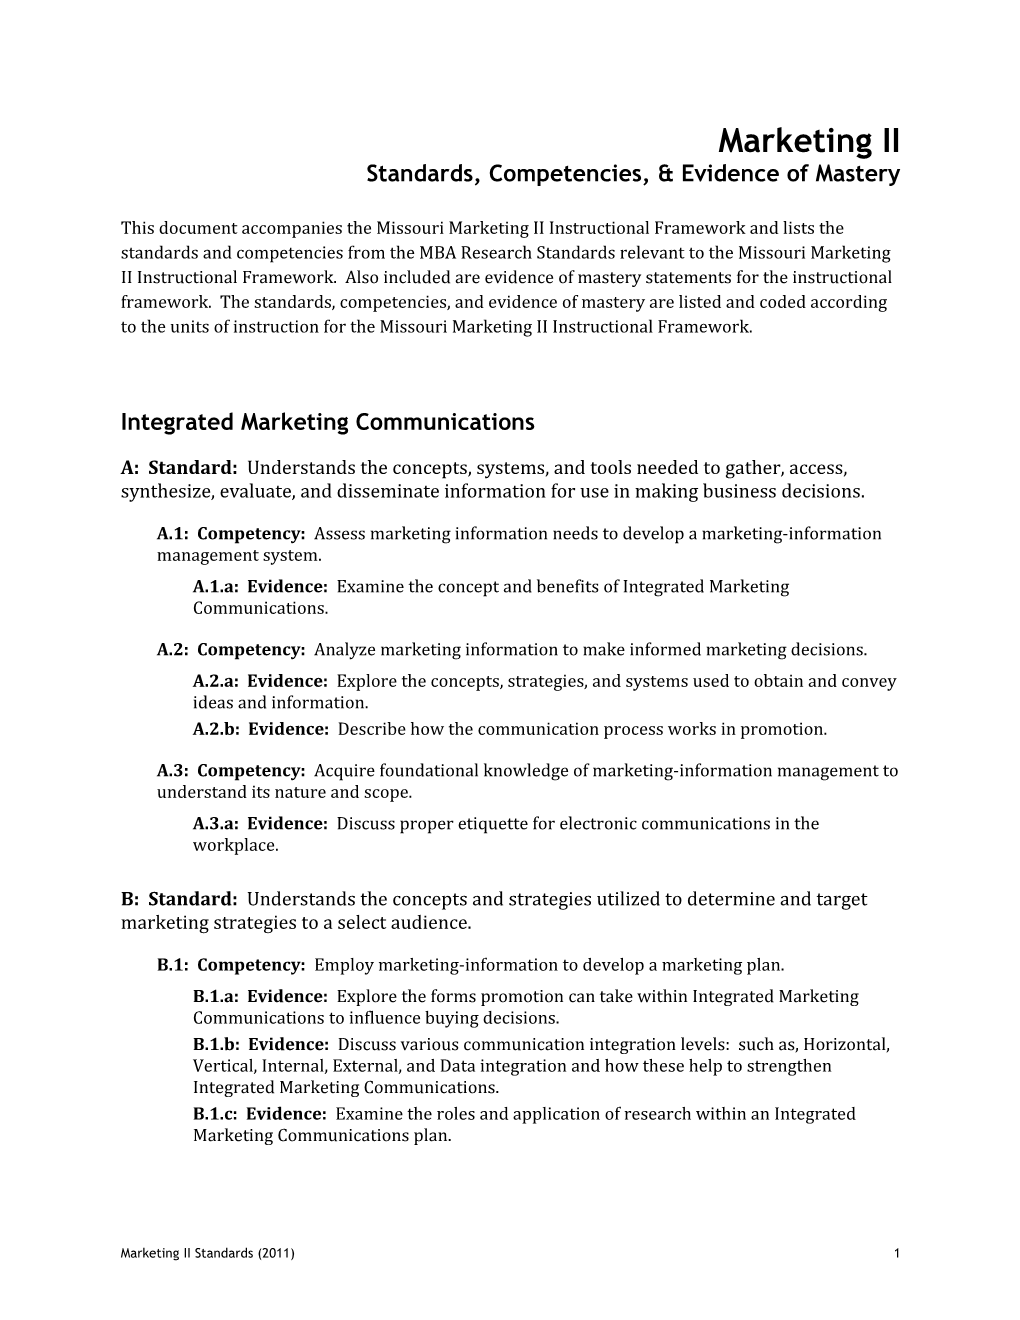 Standards, Competencies, & Evidence of Mastery